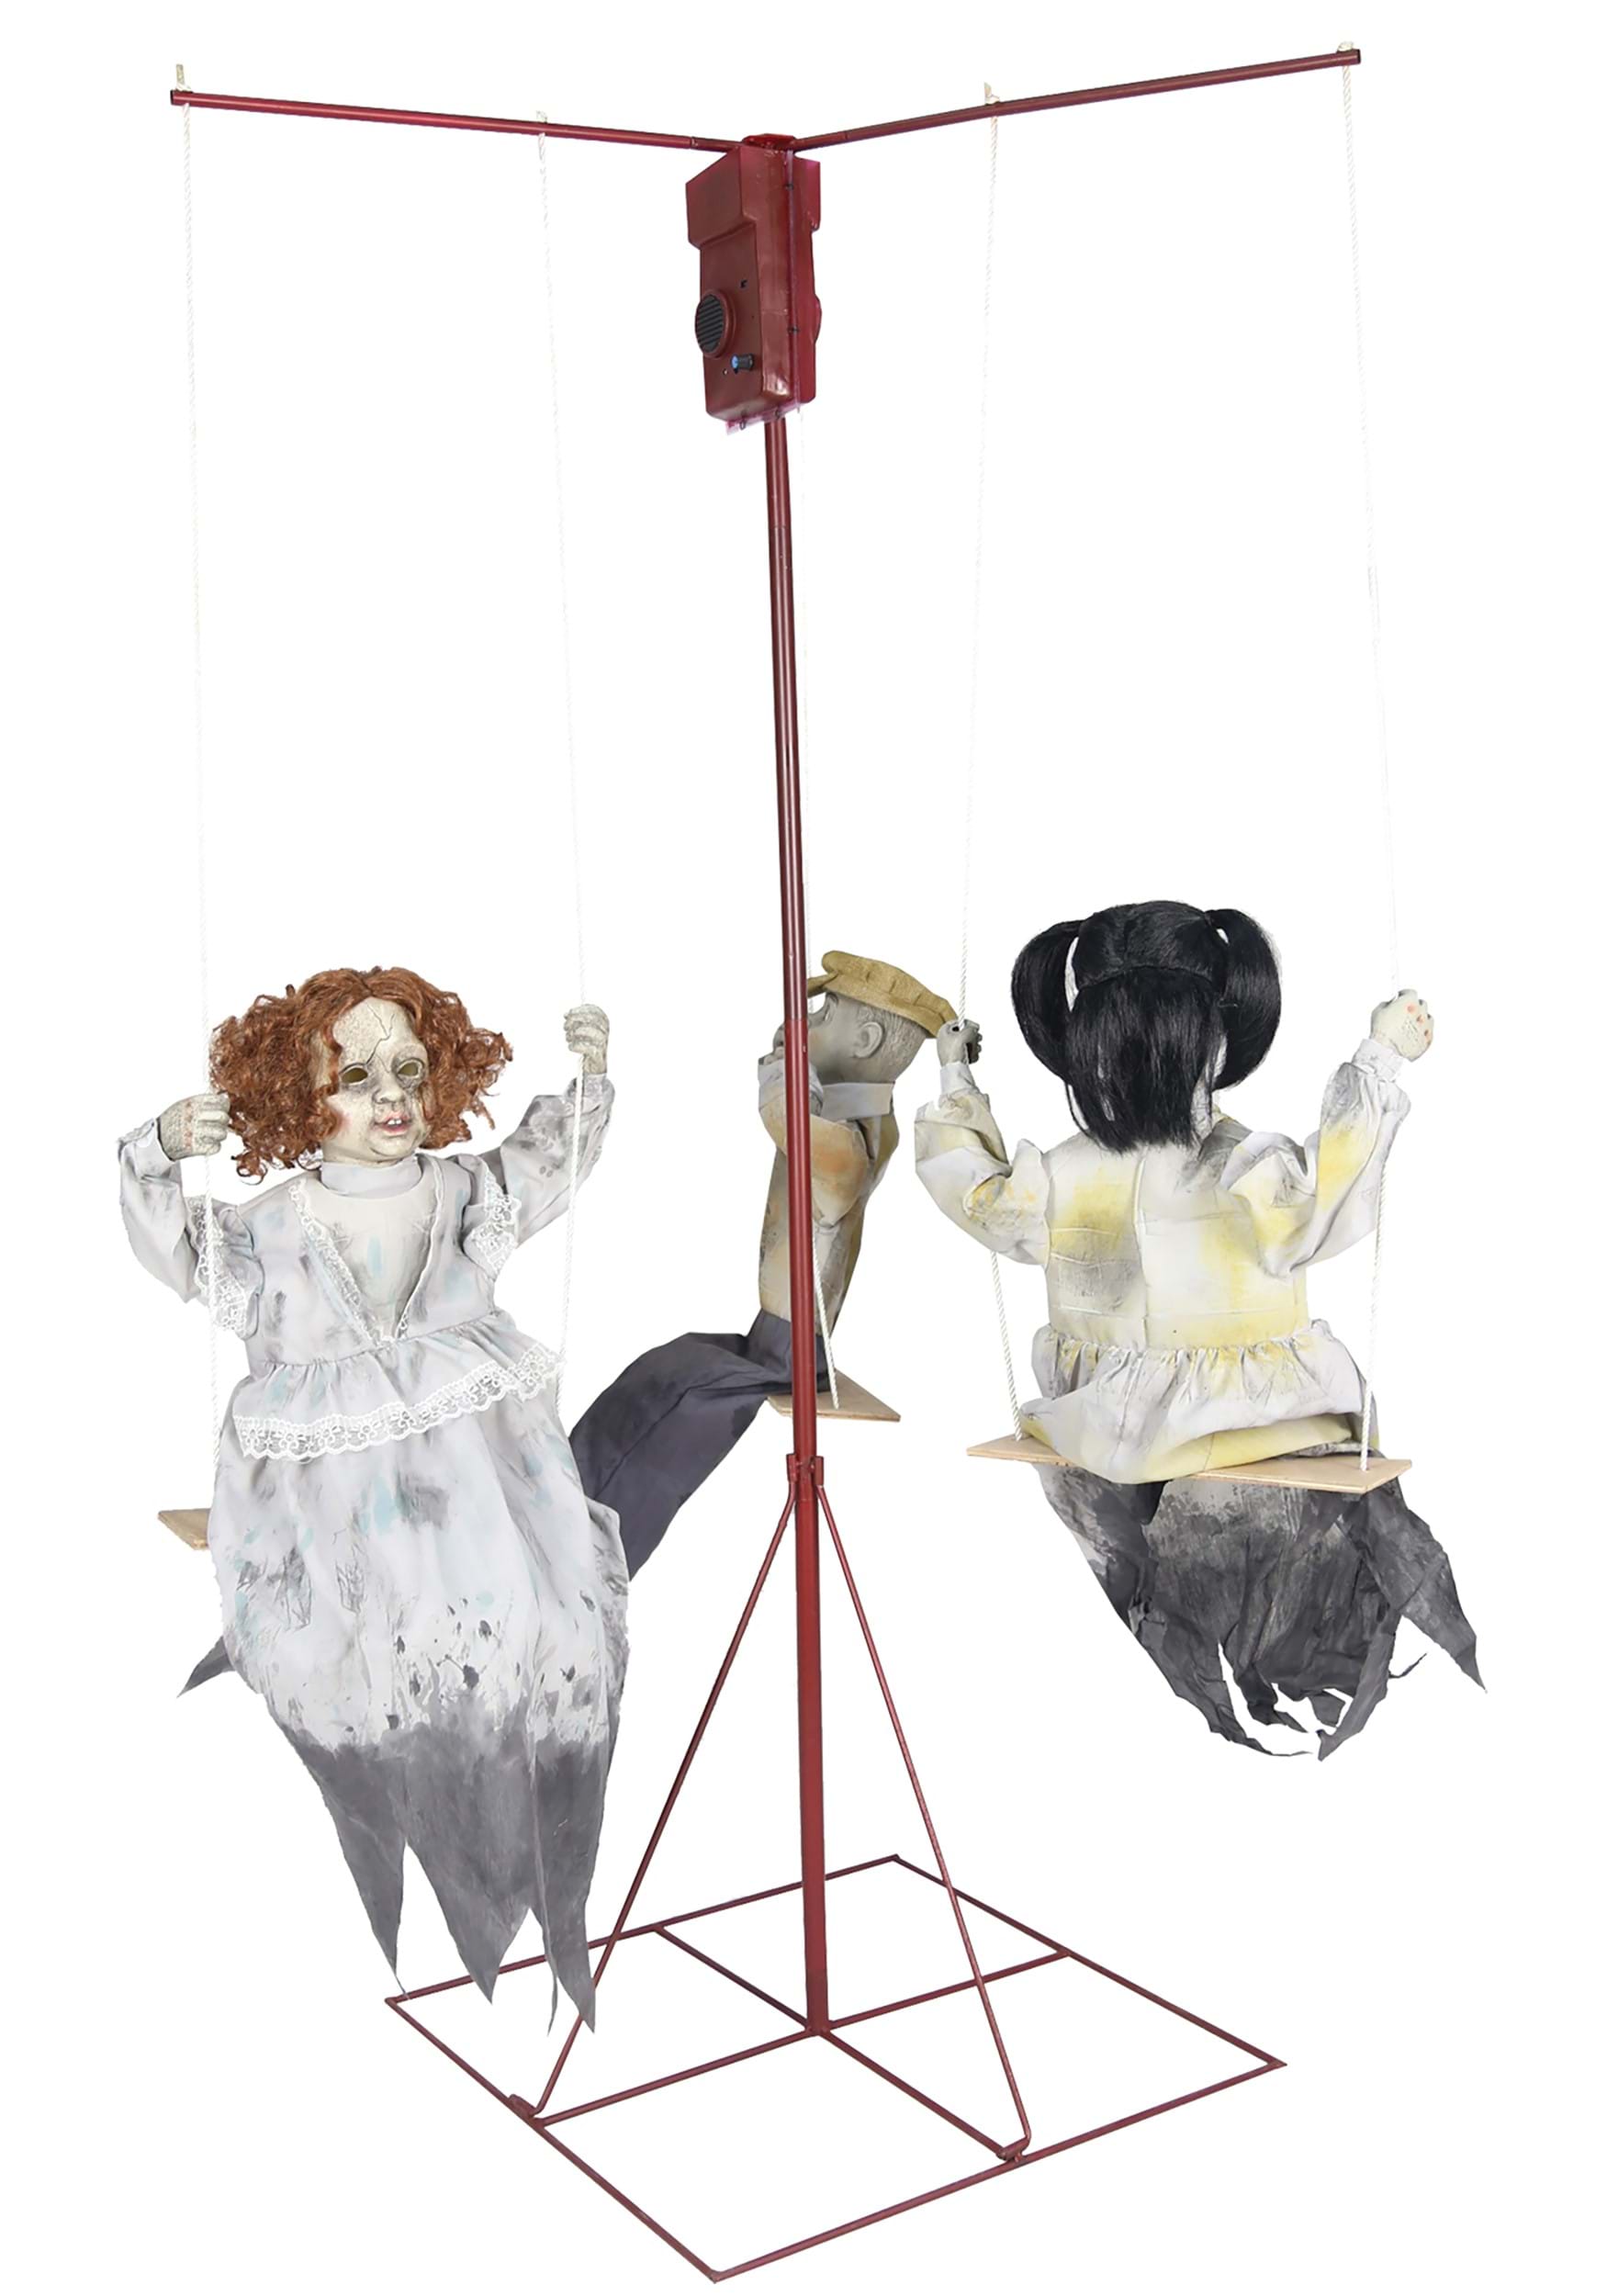 72 Ghostly Go Round with 3 Dolls Animated Halloween Prop